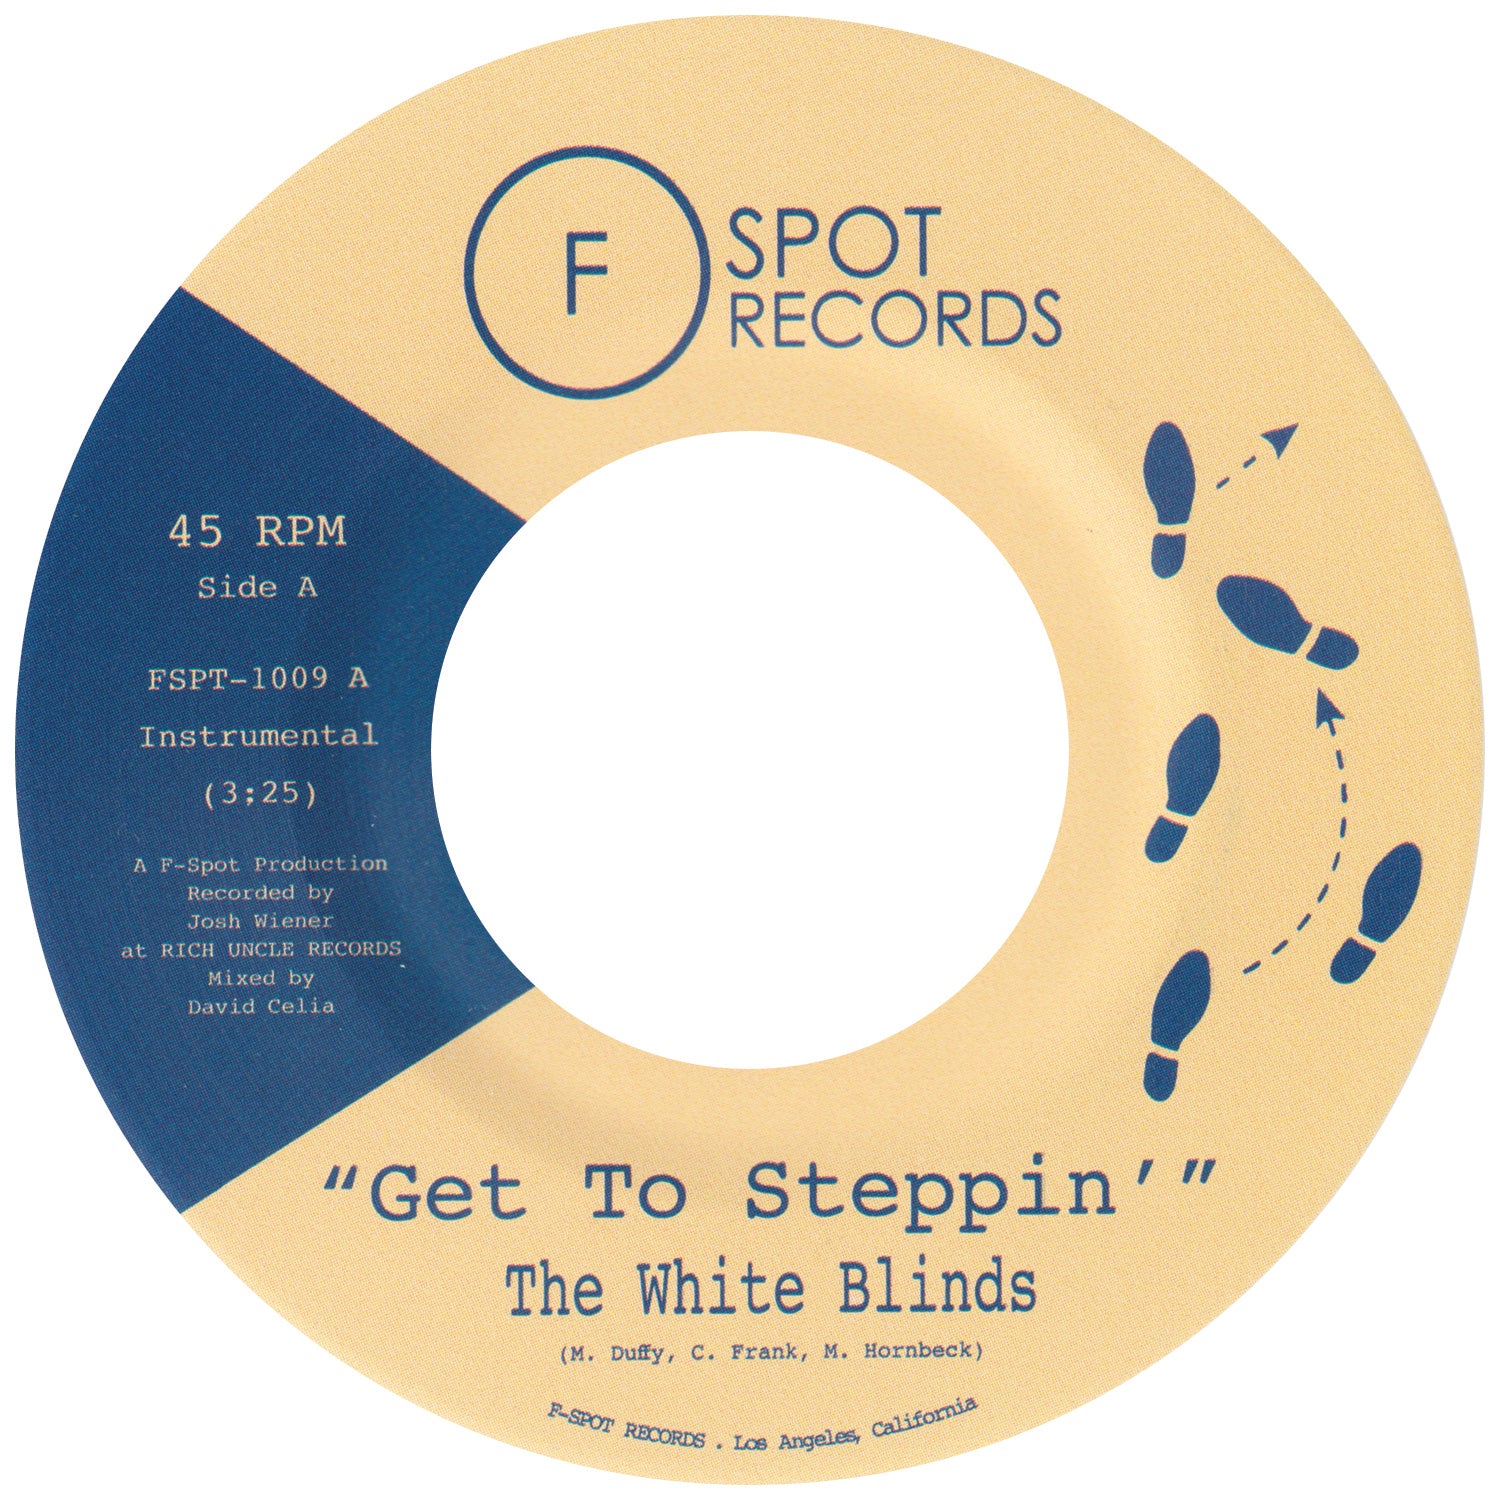 THE WHITE BLINDS - Get To Steppin' b/w Blinded